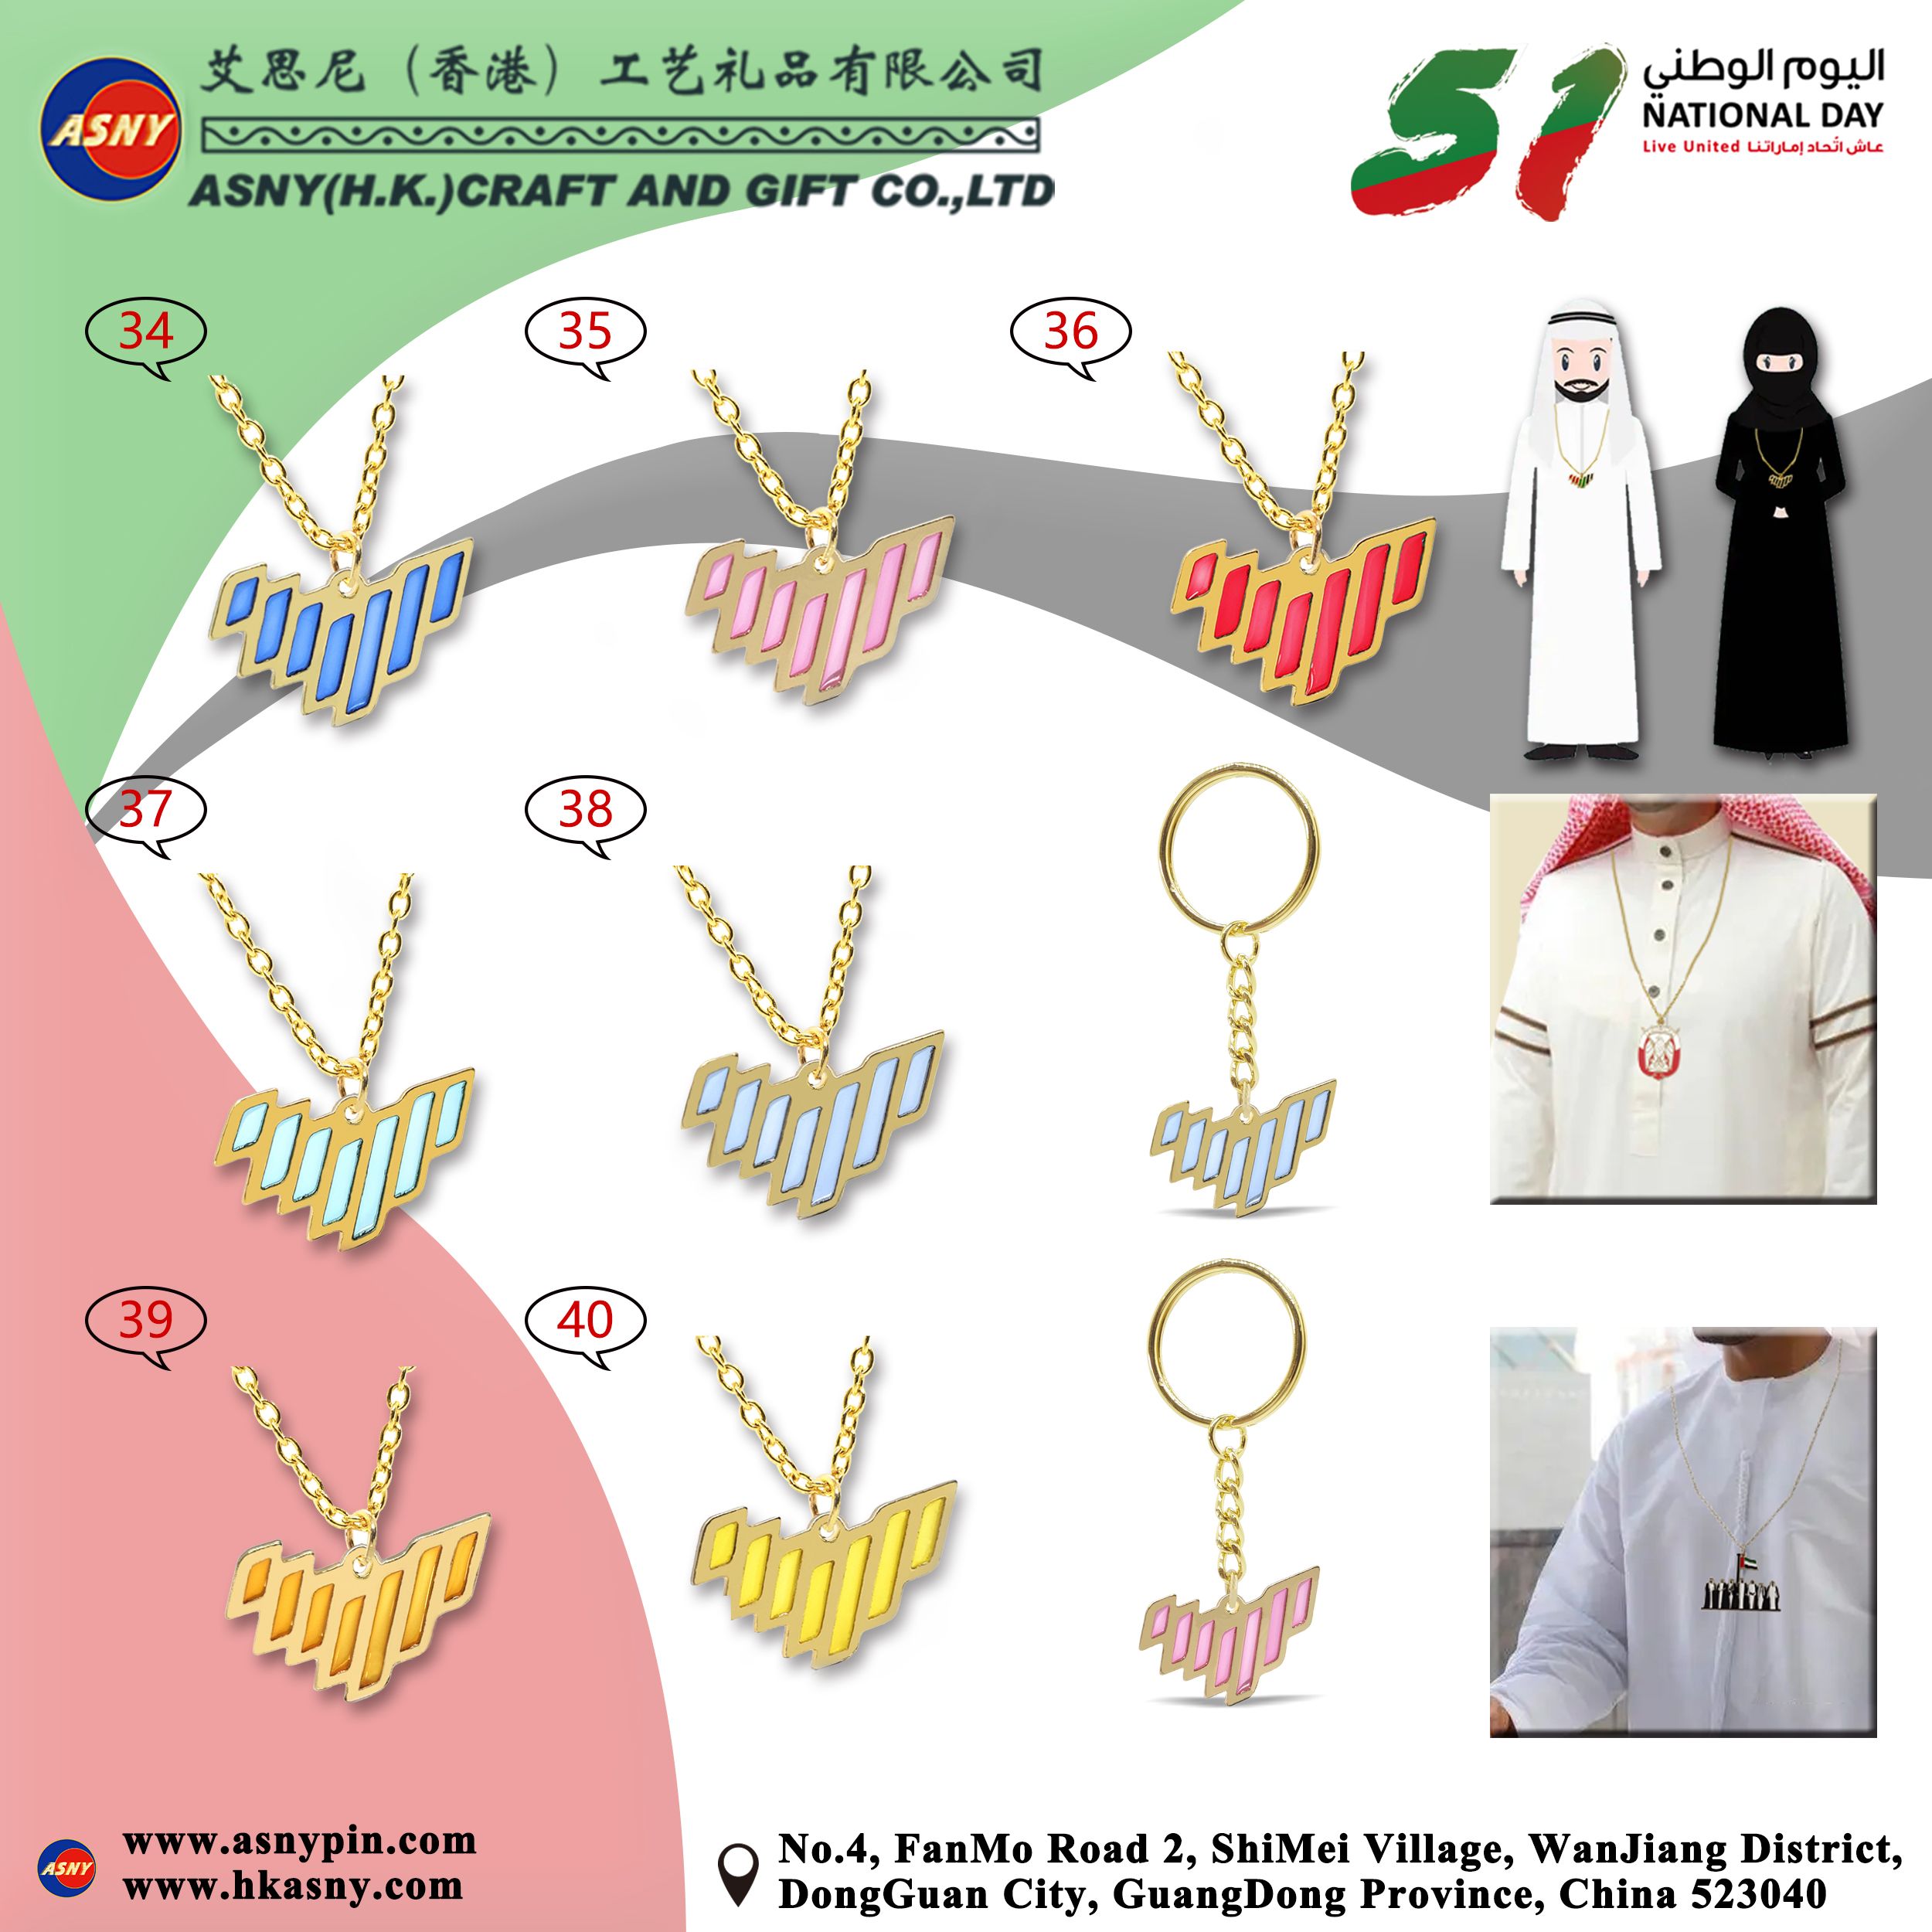 Product Catalog - UAE 51st National Day Collection (7)